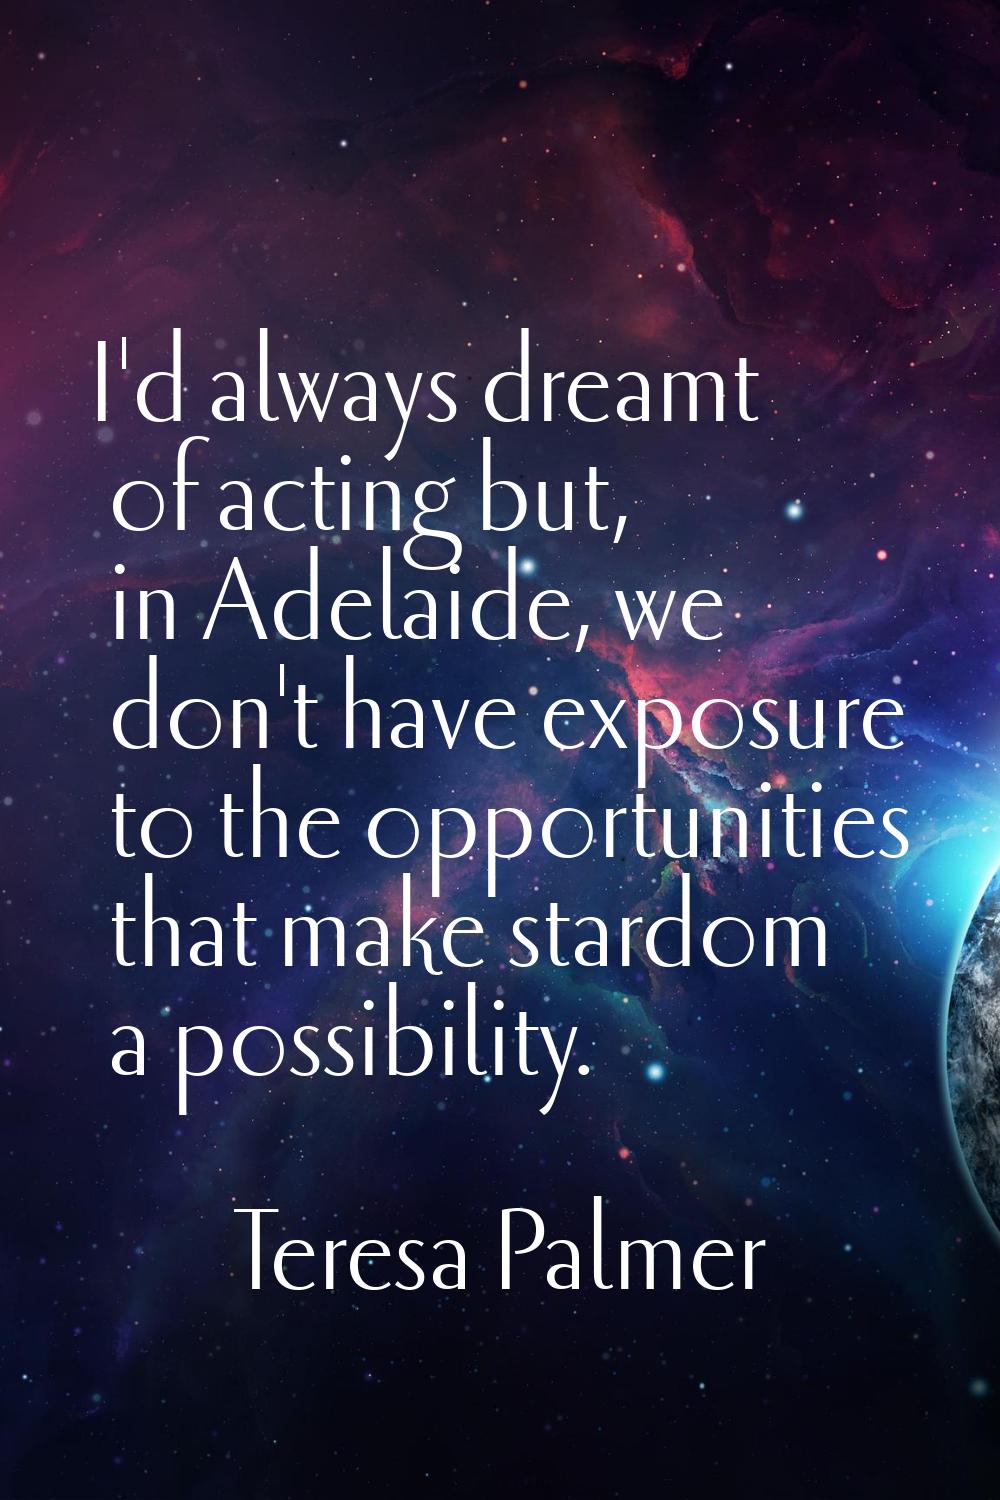 I'd always dreamt of acting but, in Adelaide, we don't have exposure to the opportunities that make